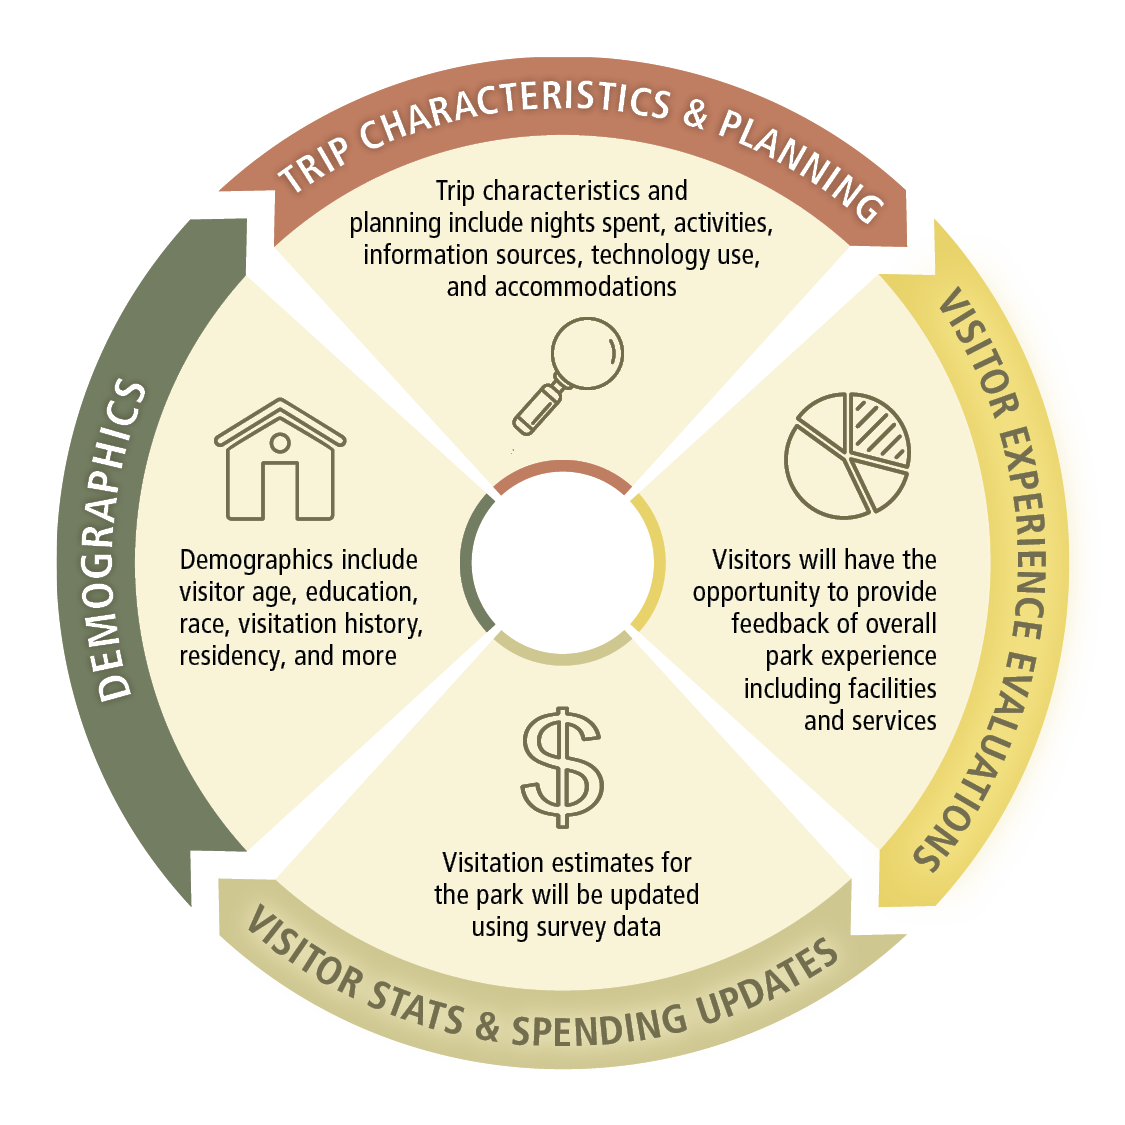 A wheel shaped graphic showing the interaction between different areas of interest for SEM Visitor Surveys. These include trip characteristics and planning, visitor experience evaluations, visitor stats and spending updates, and demographics.